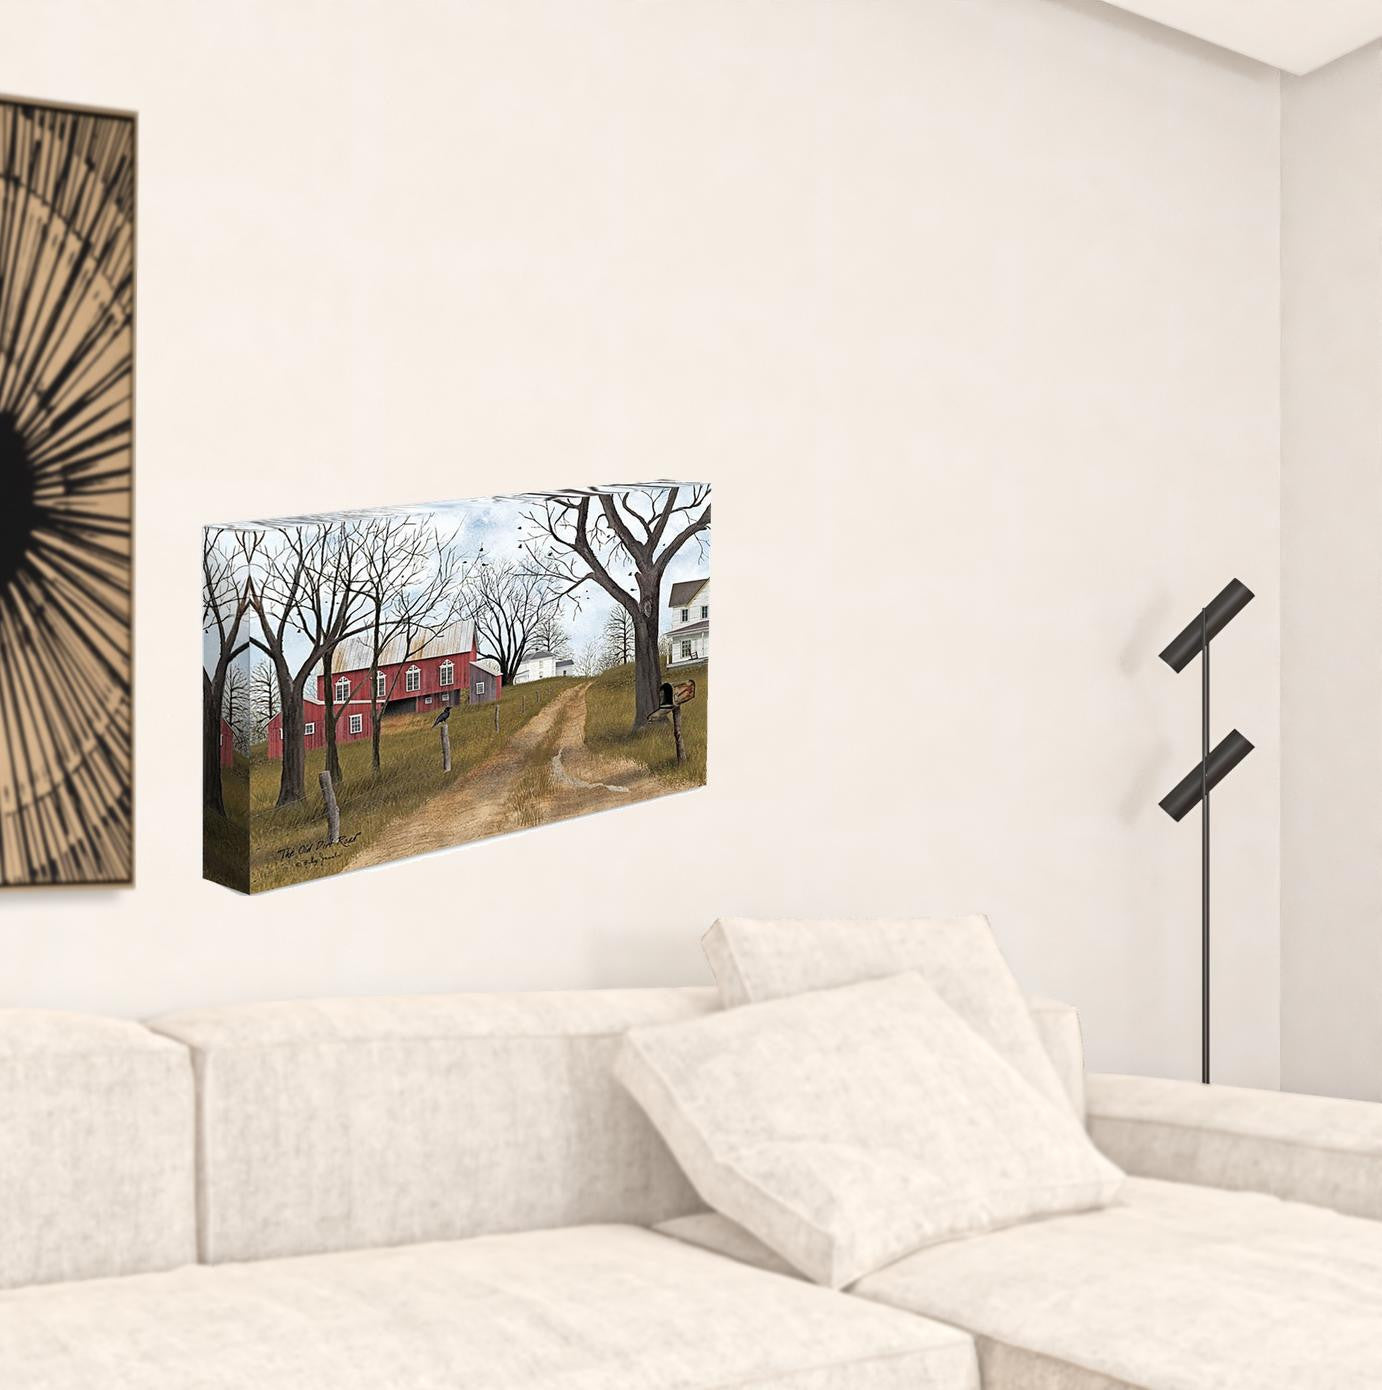 The Old Dirt Road Wrapped Canvas Print Wall Art